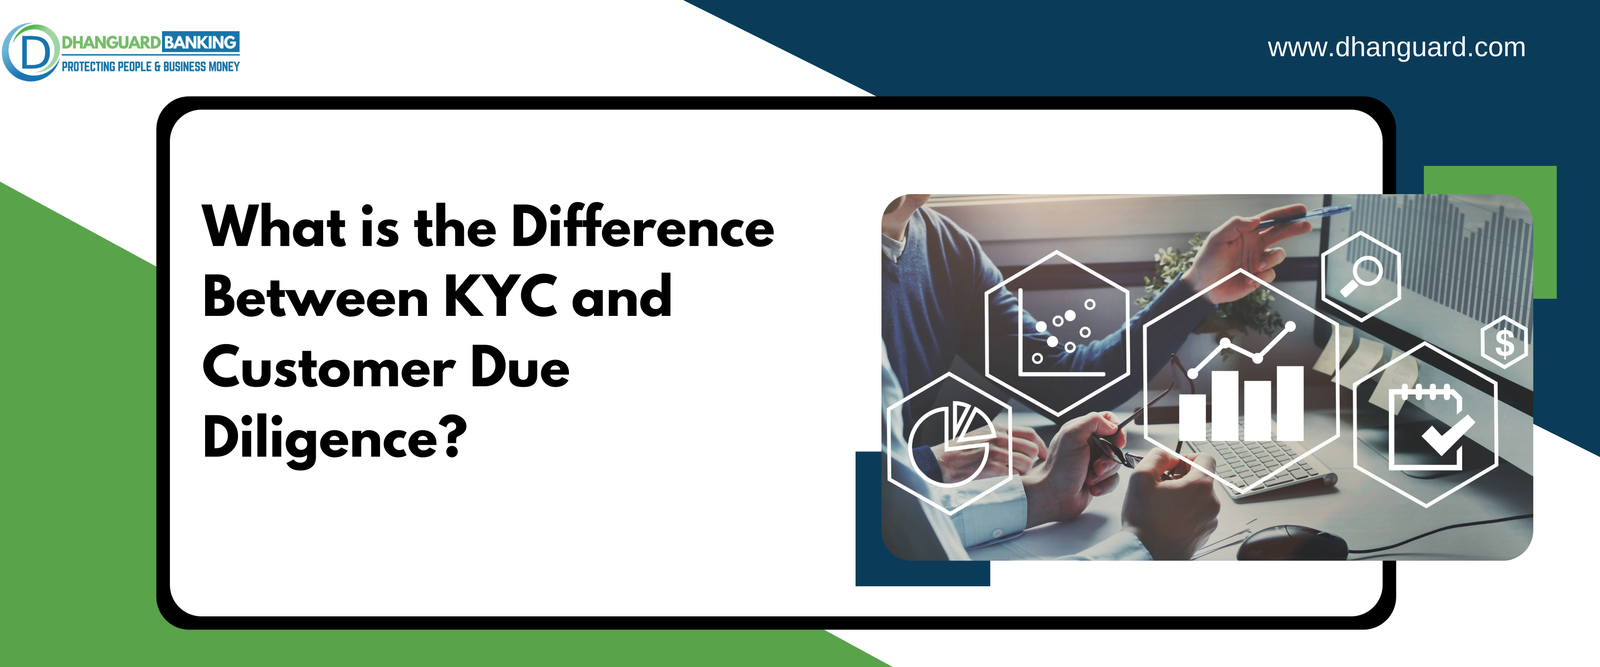 What is the Difference Between KYC and Customer Due Diligence?